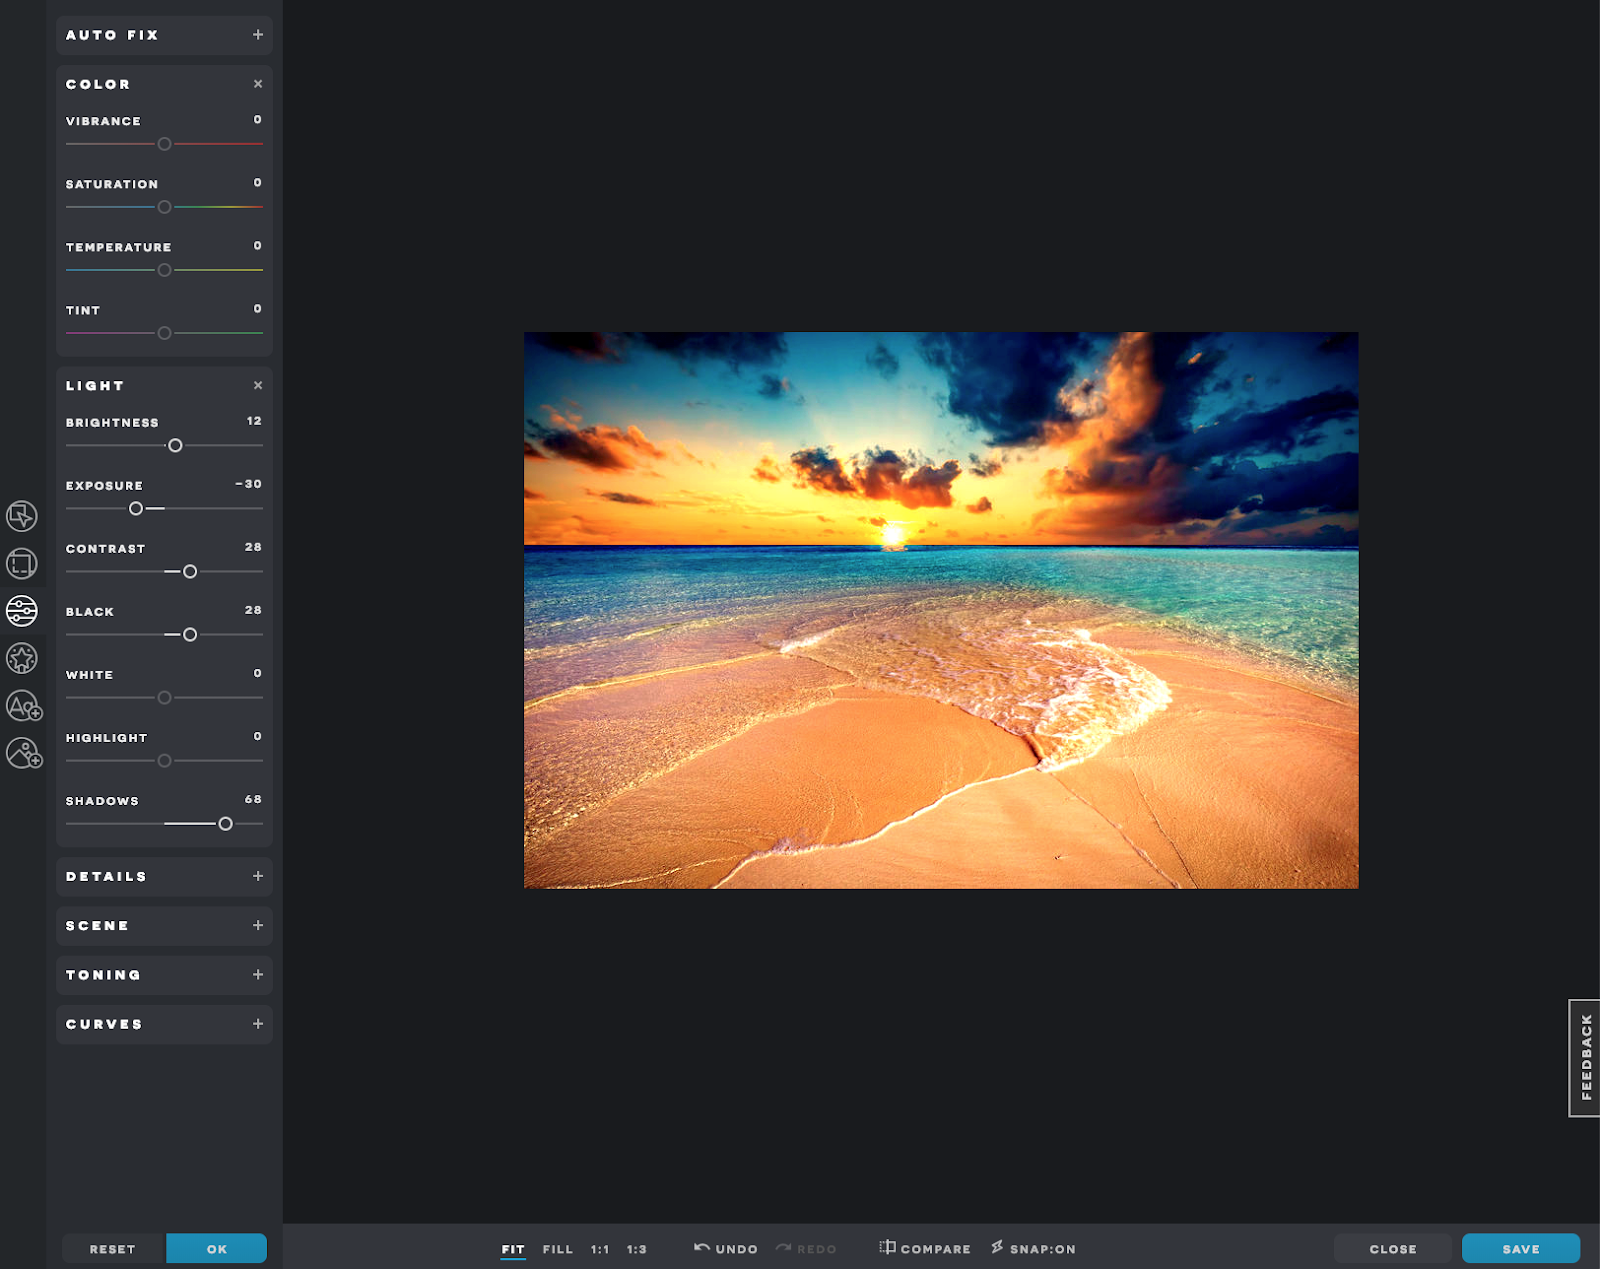 photo editor software for mac